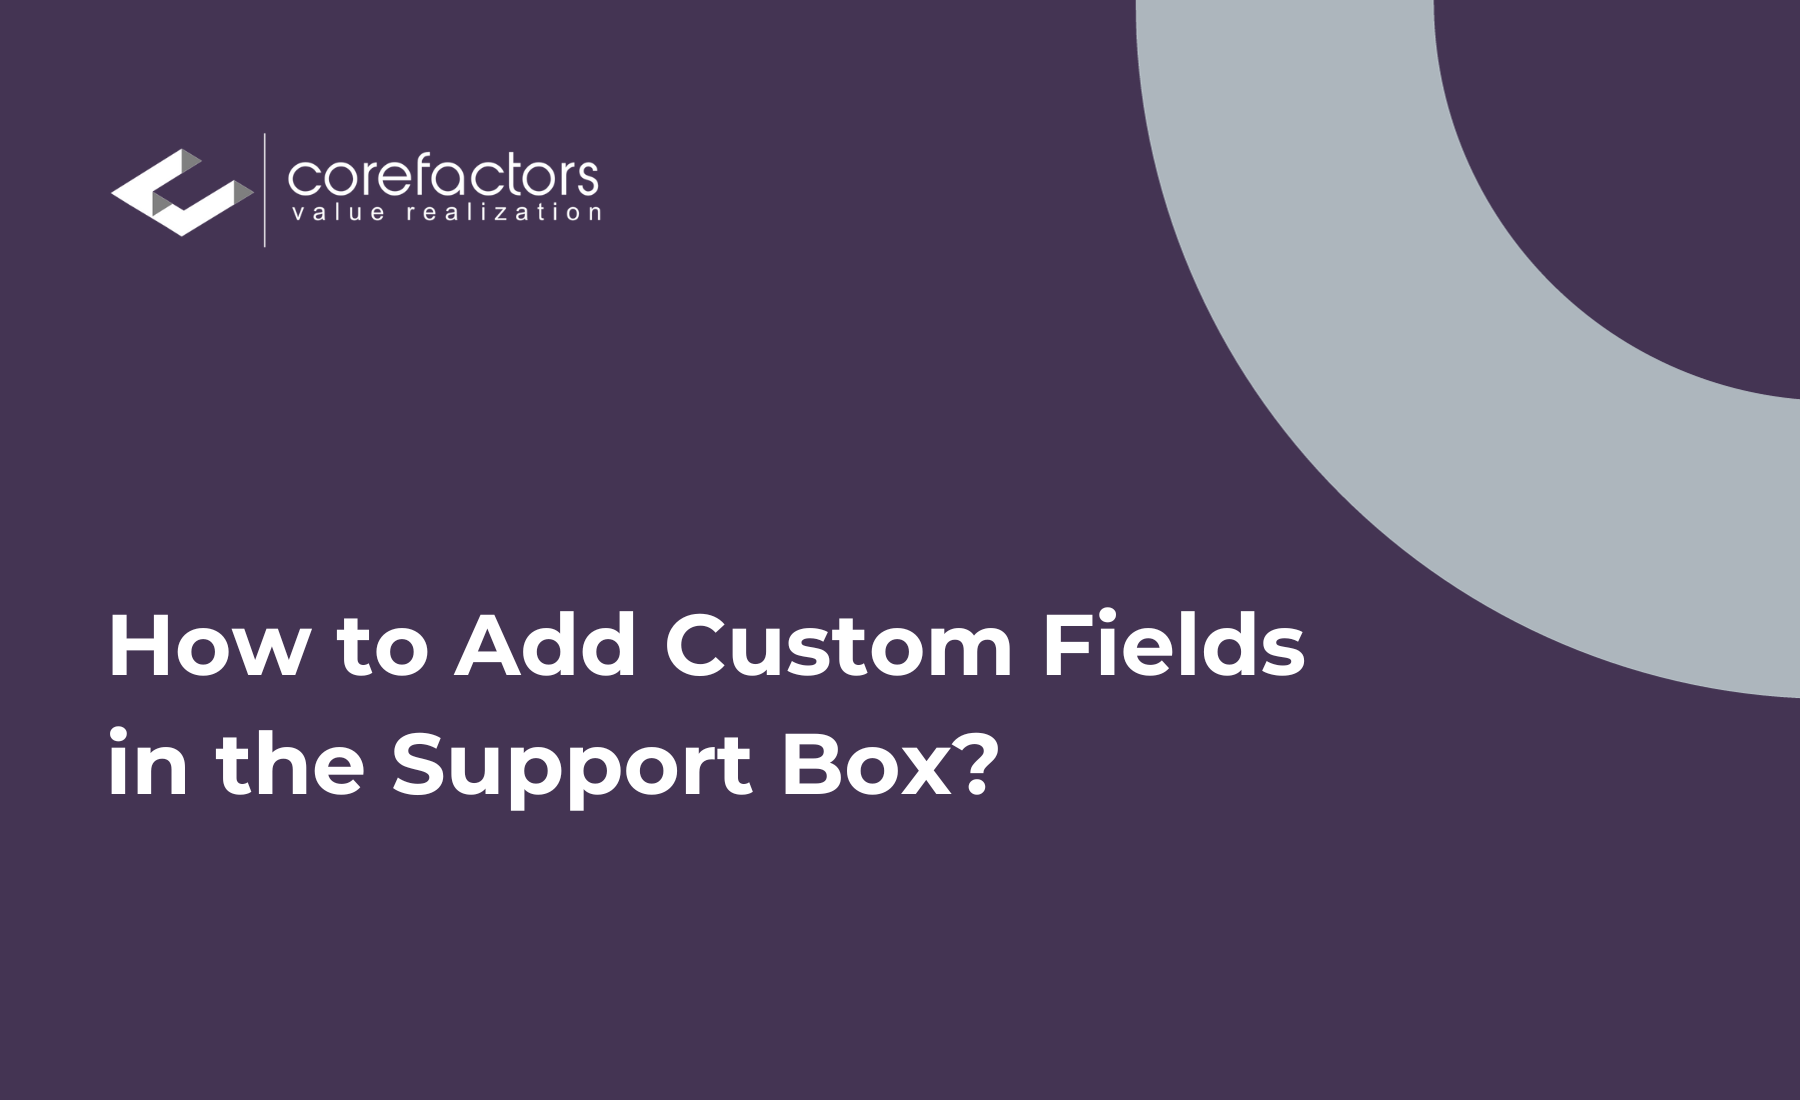 How to add custom fields in the support box of Corefactors CRM?